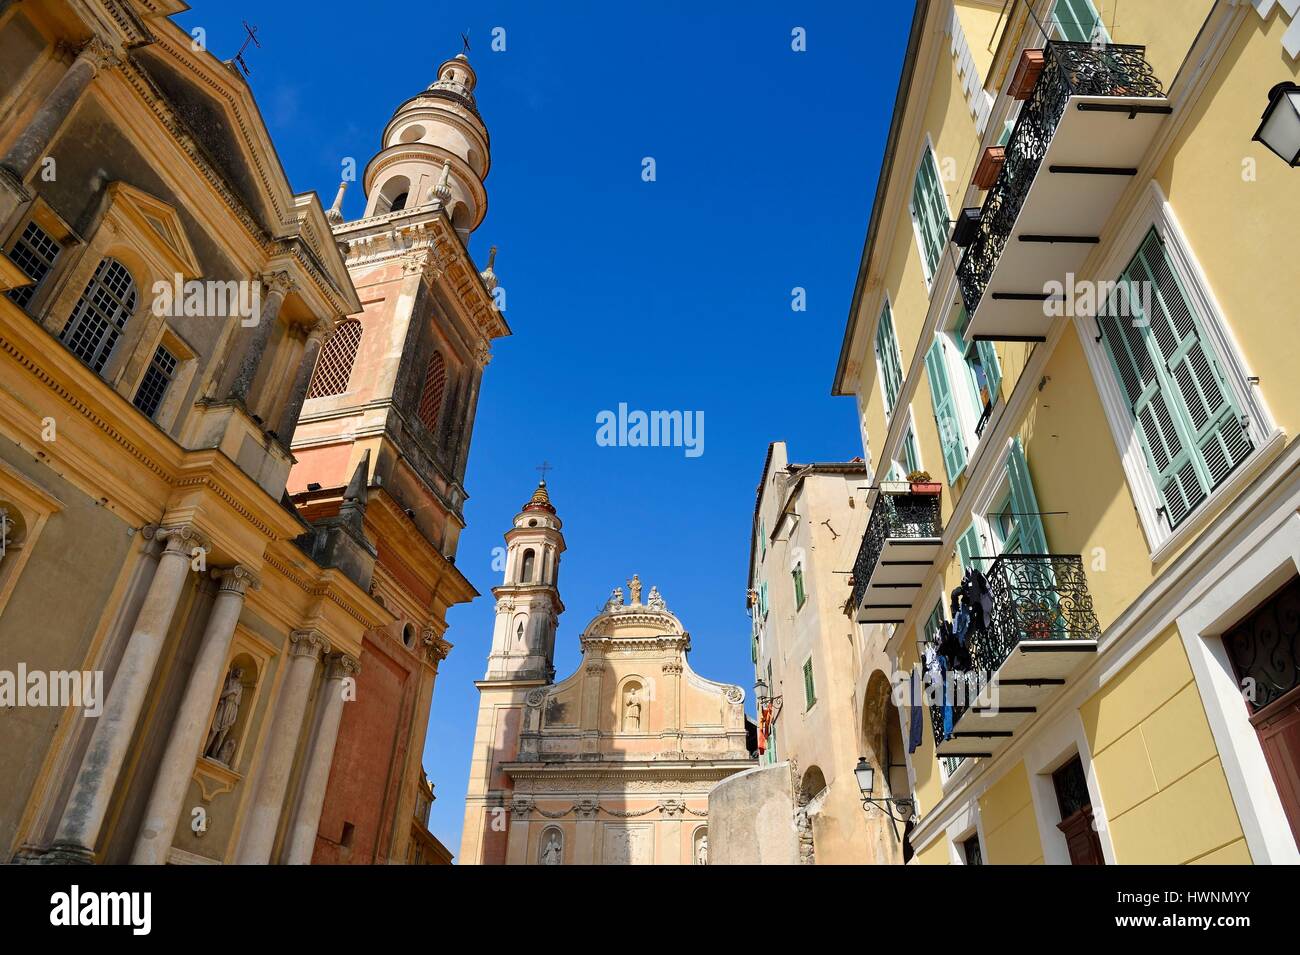 France, Alpes-Maritimes, Menton, old town, the basilique Saint Michel Archange (Saint Michael the Archangel Basilica) left and the Chapel of the White Penitents in the background Stock Photo